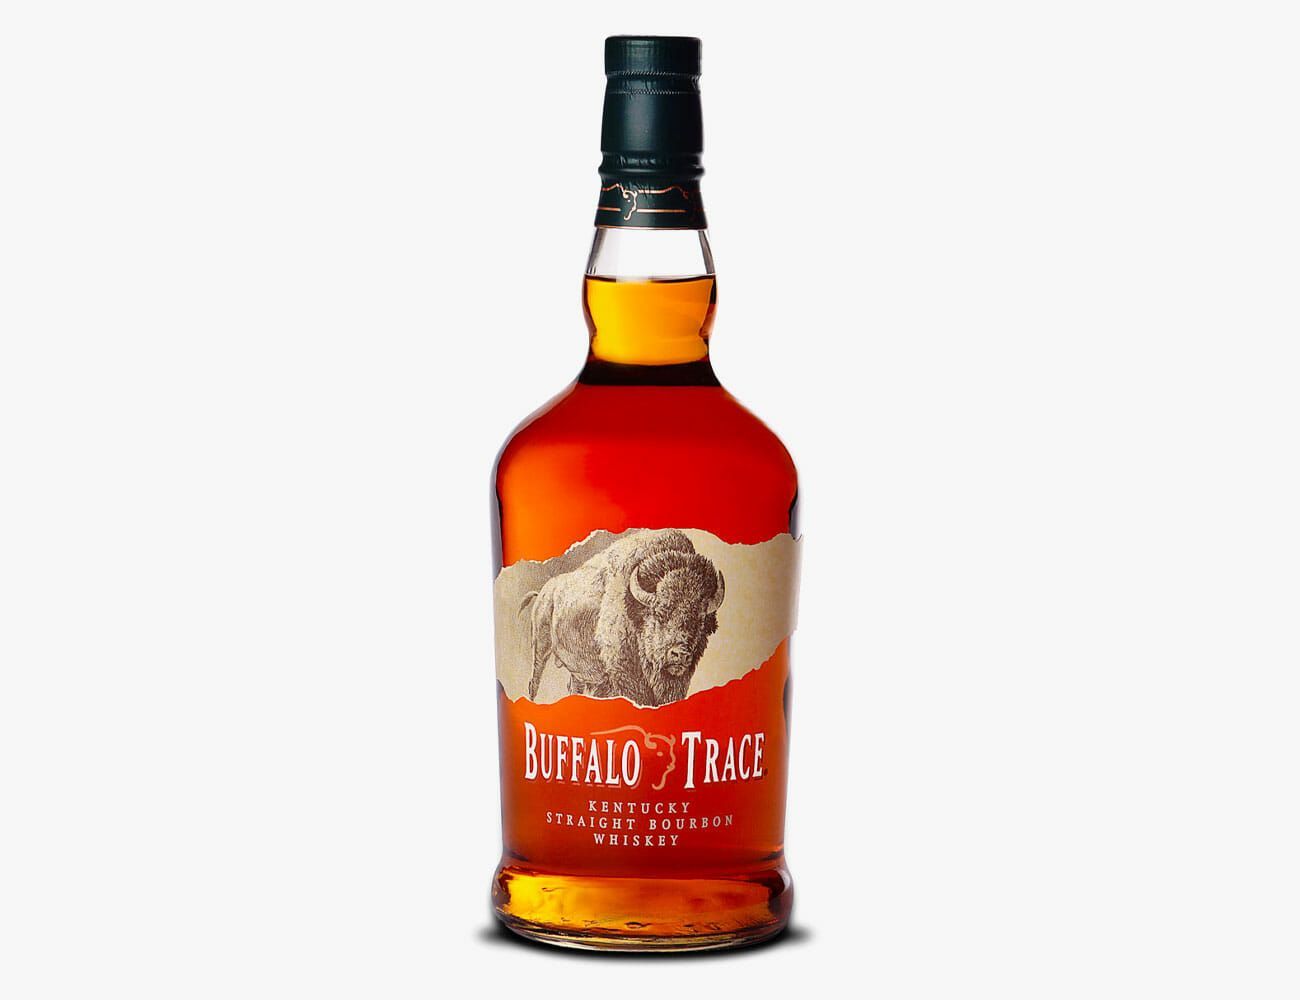 Shipley Litteratur udvande Buffalo Trace Whiskey: Important Brands, Bottles and Prices